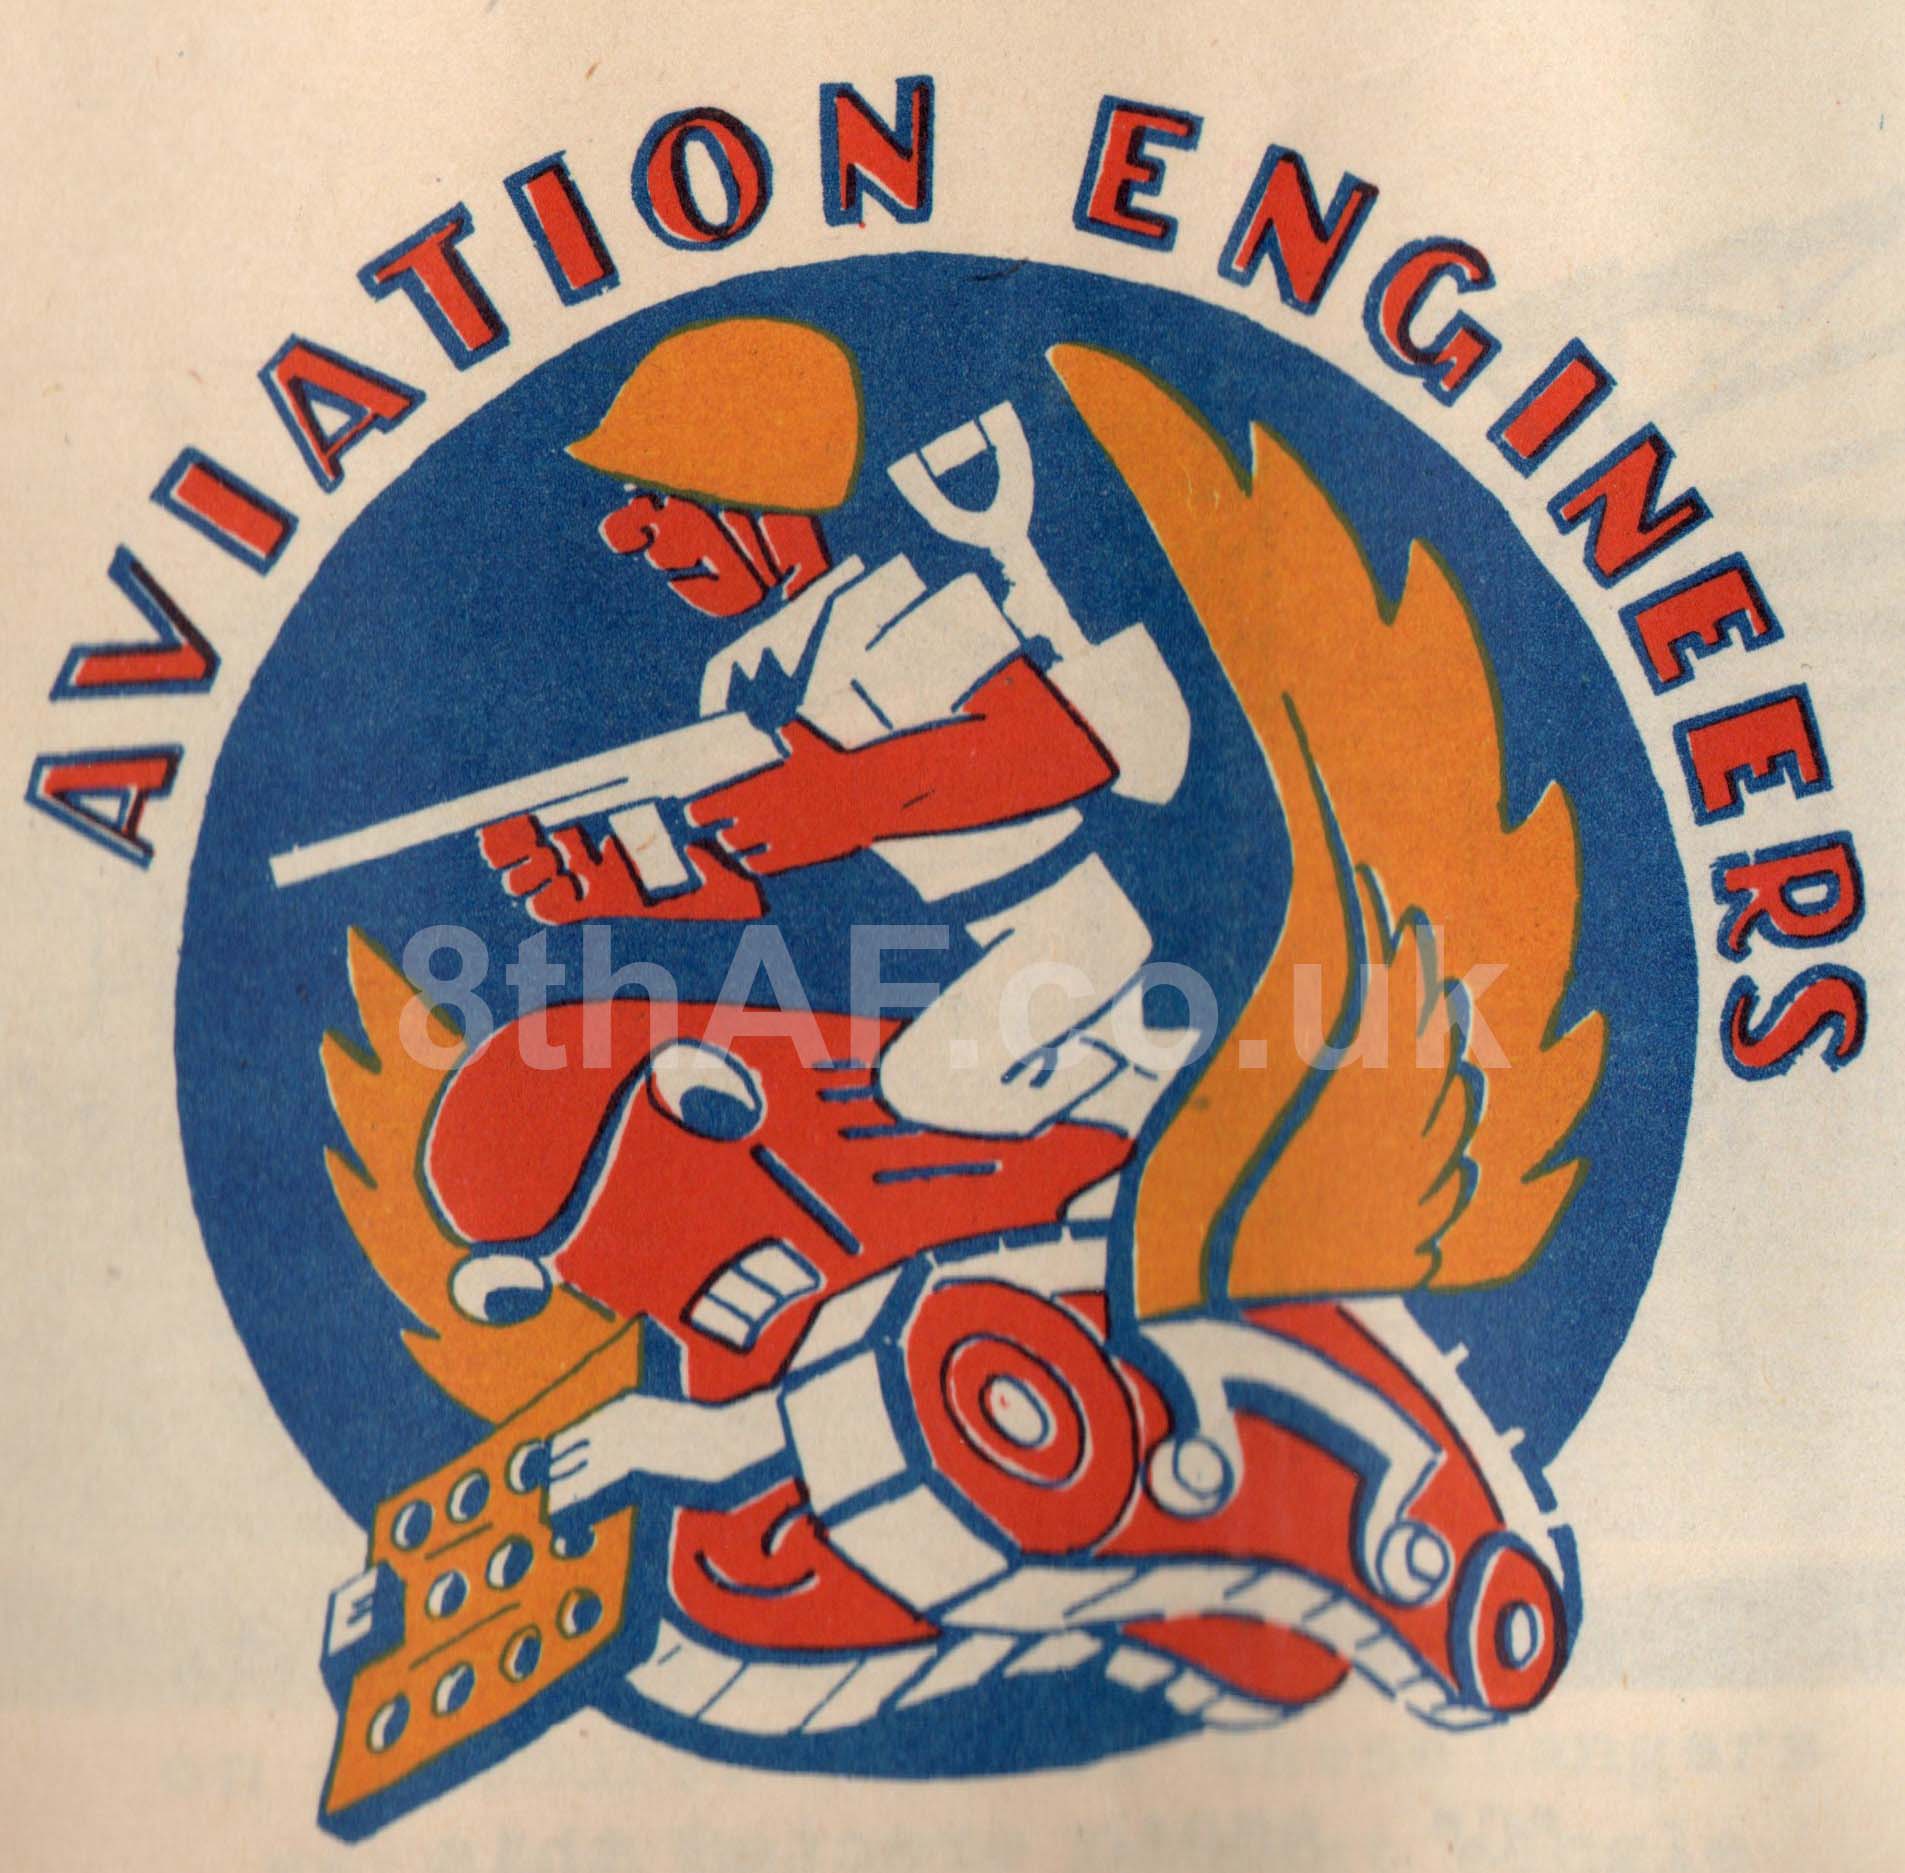 The emblem of the Aviation Engineers